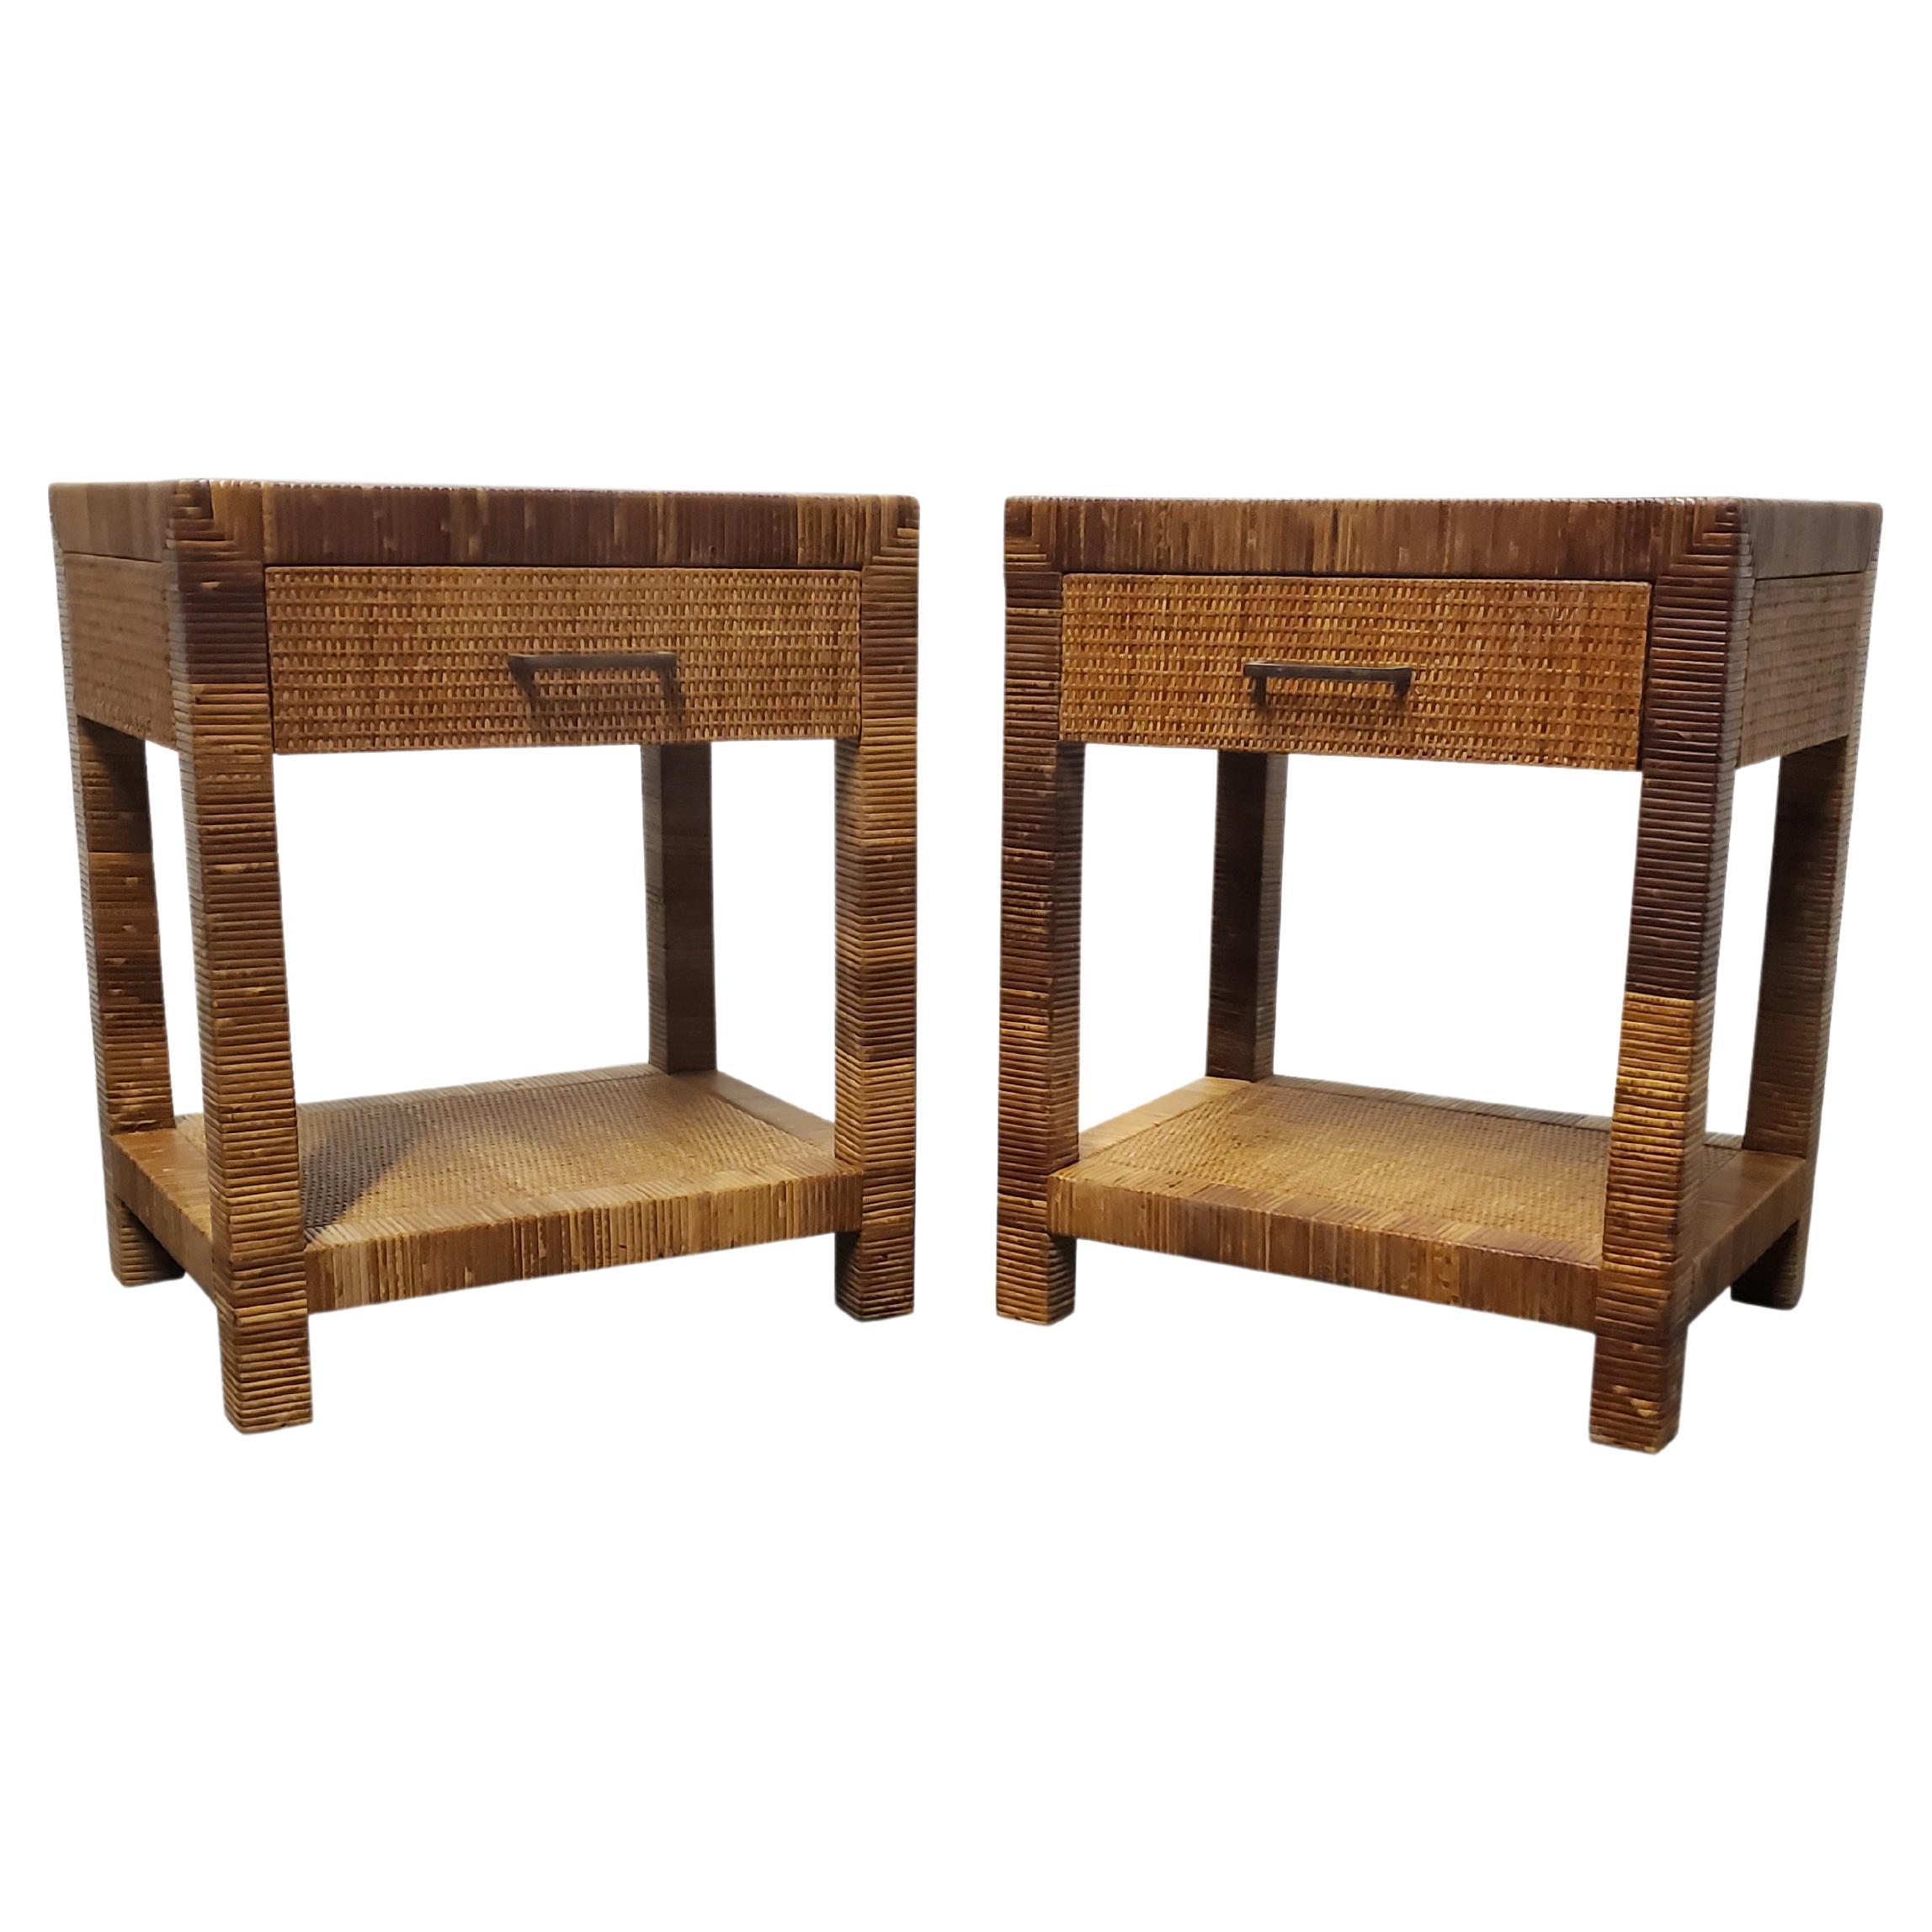 Pair of Signed Bielecky Brothers Cane / Raffia Wrapped Nightstands